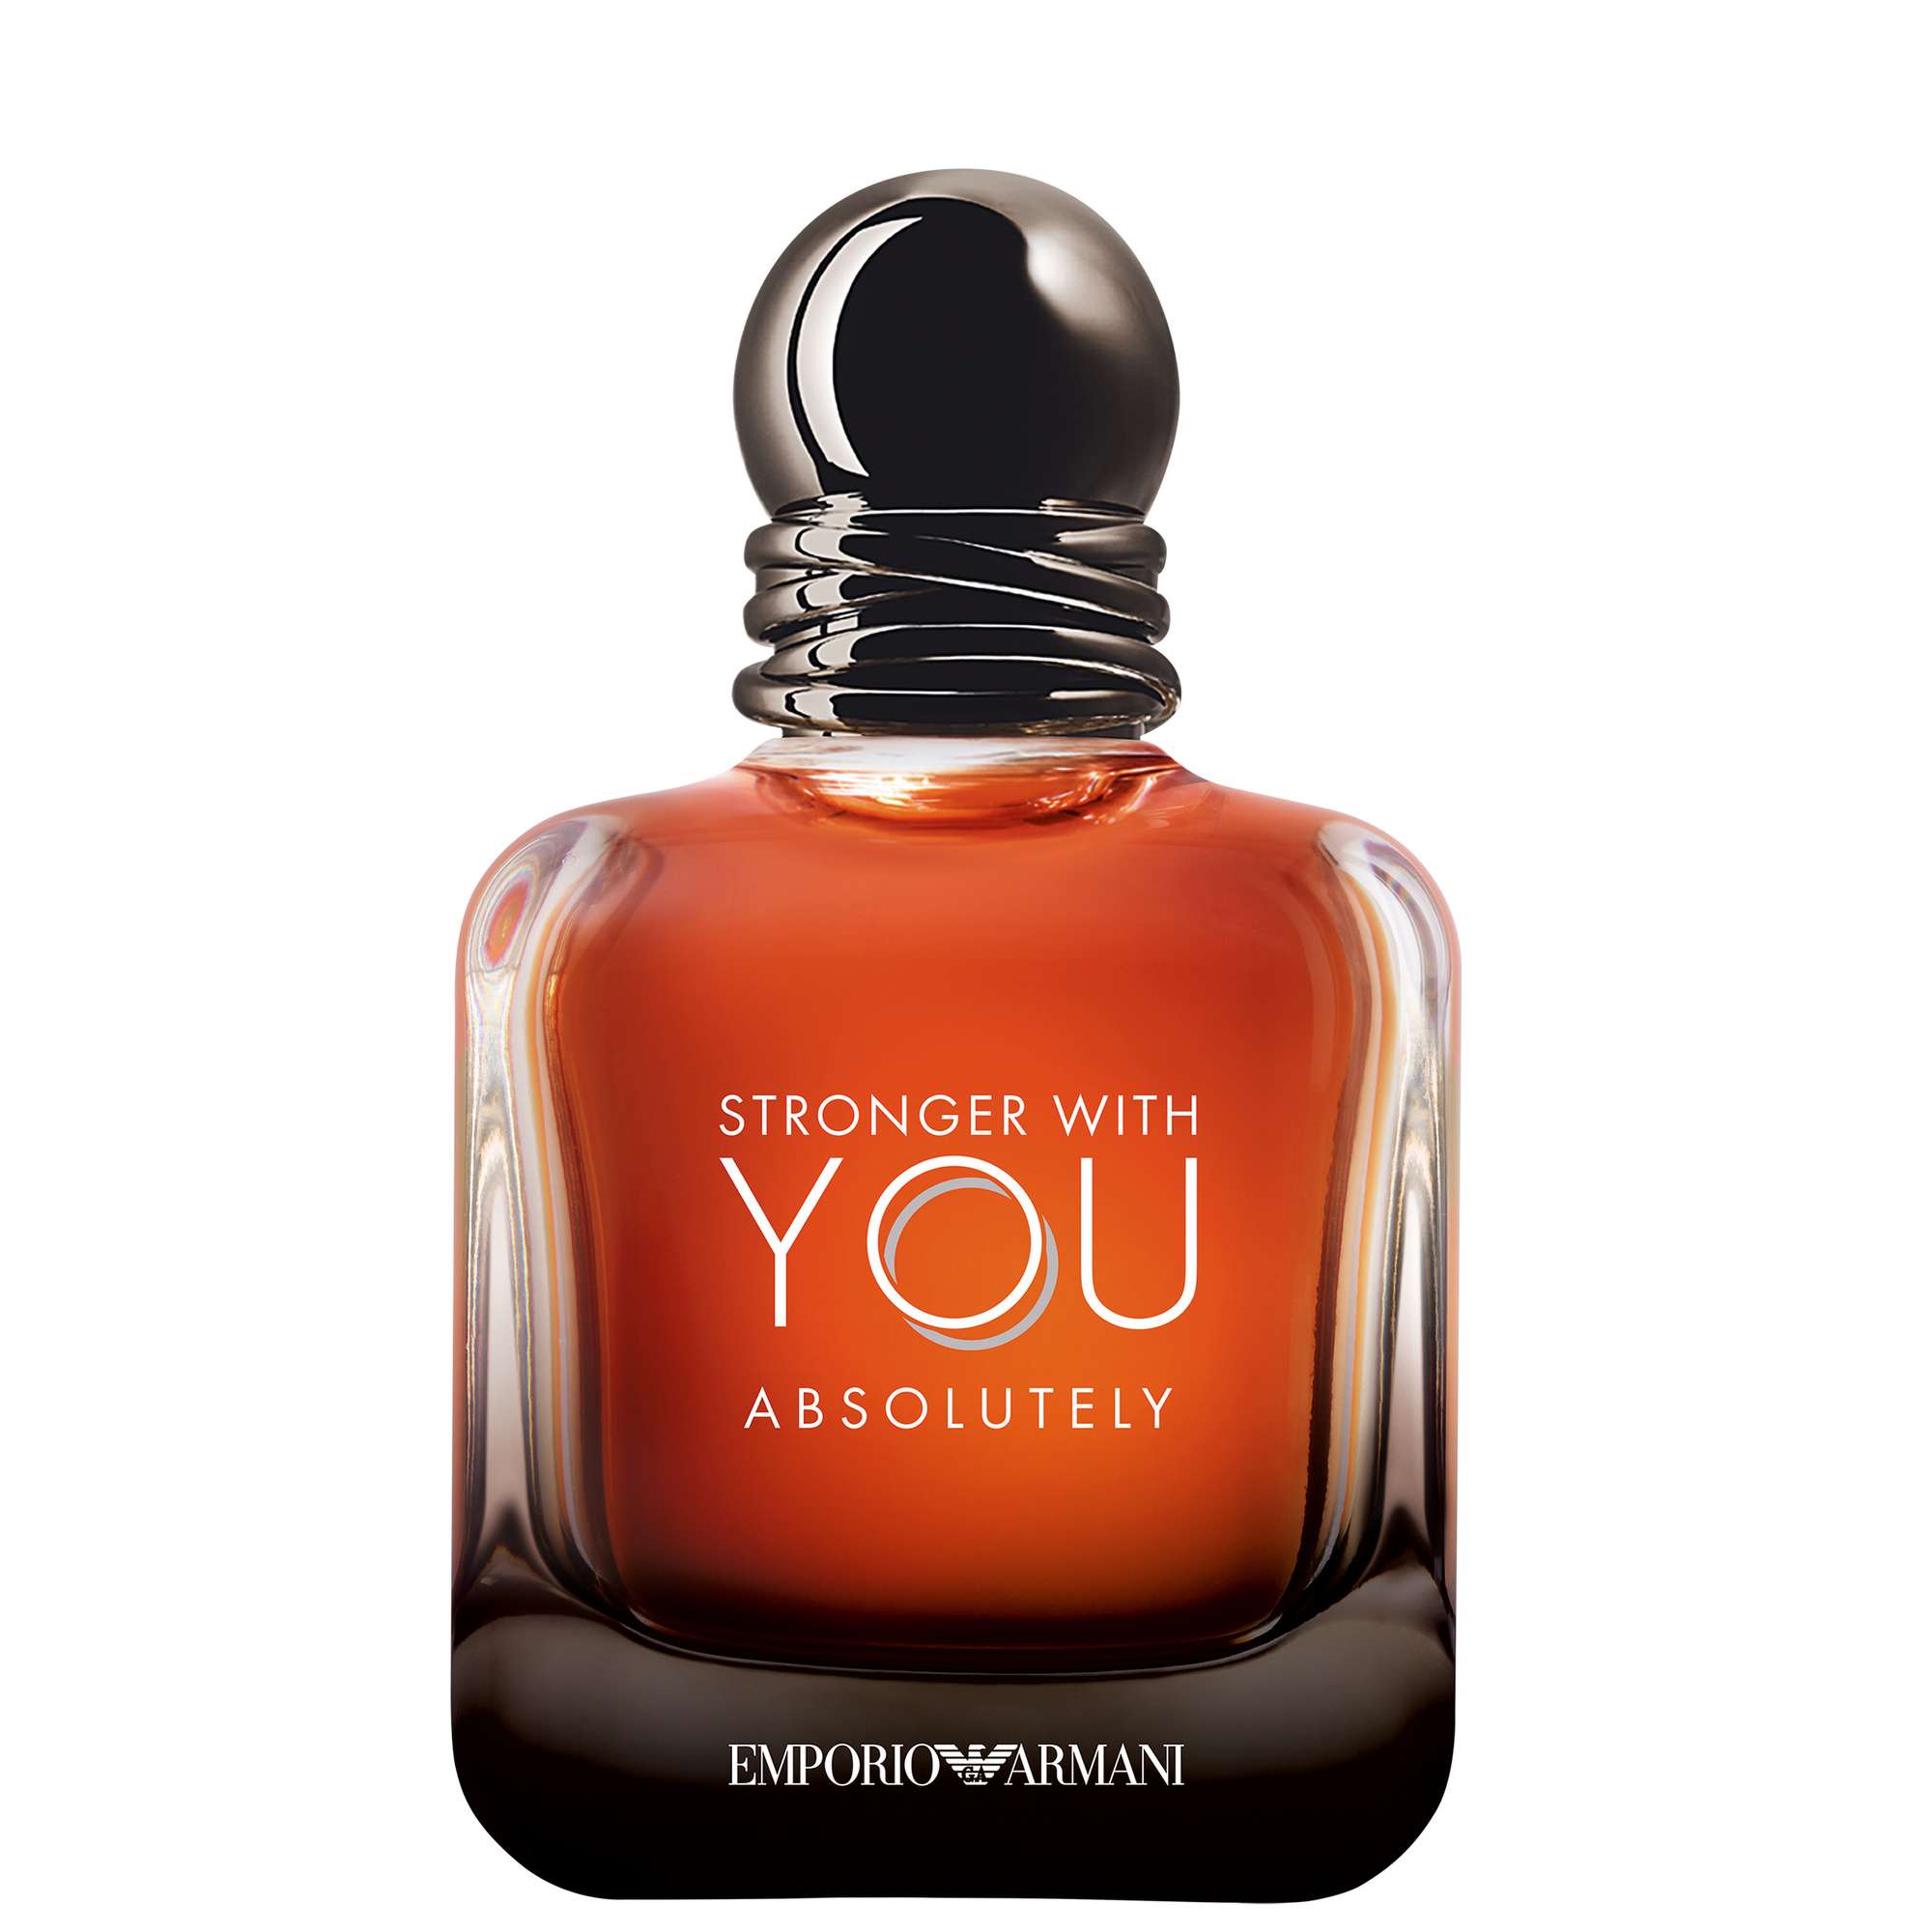 Image of Armani Stronger With You Absolutely Eau de Parfum Spray 50ml